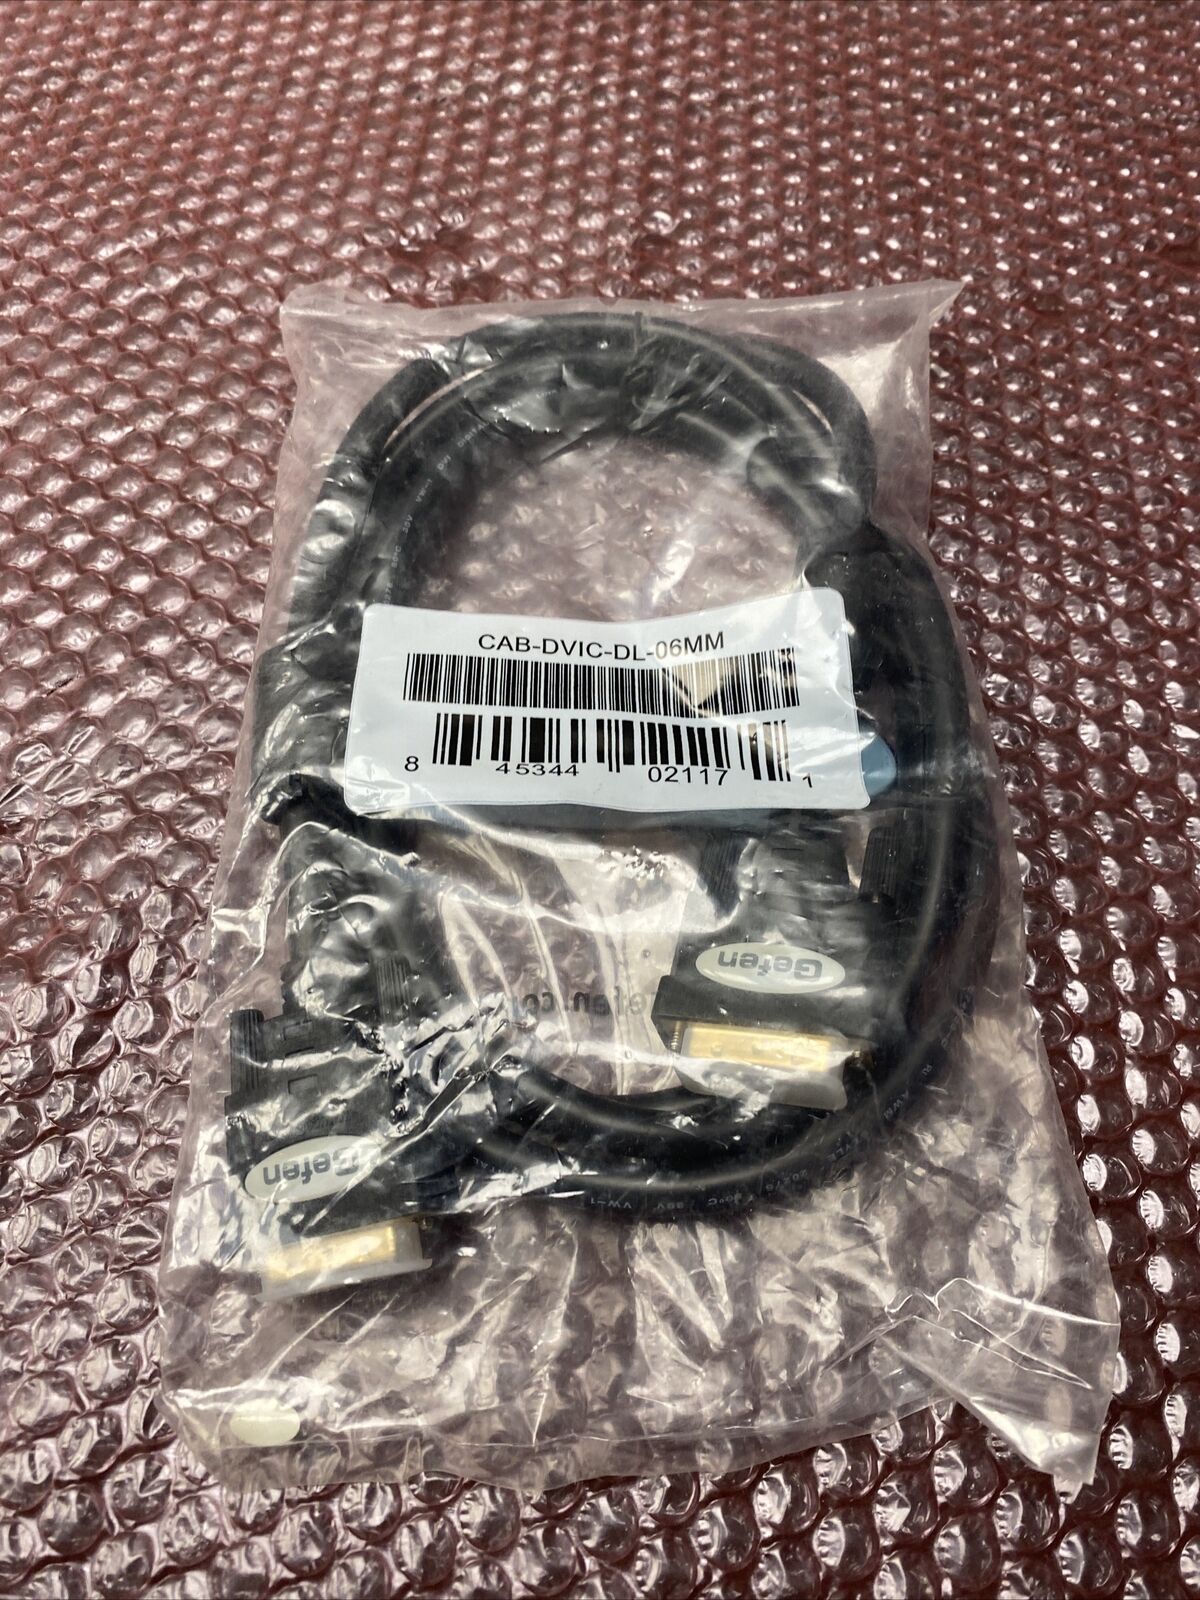 Gefen CAB-DVIC-DL-06MM 6' Dual Link DVI Cable (M-M) New in Package 